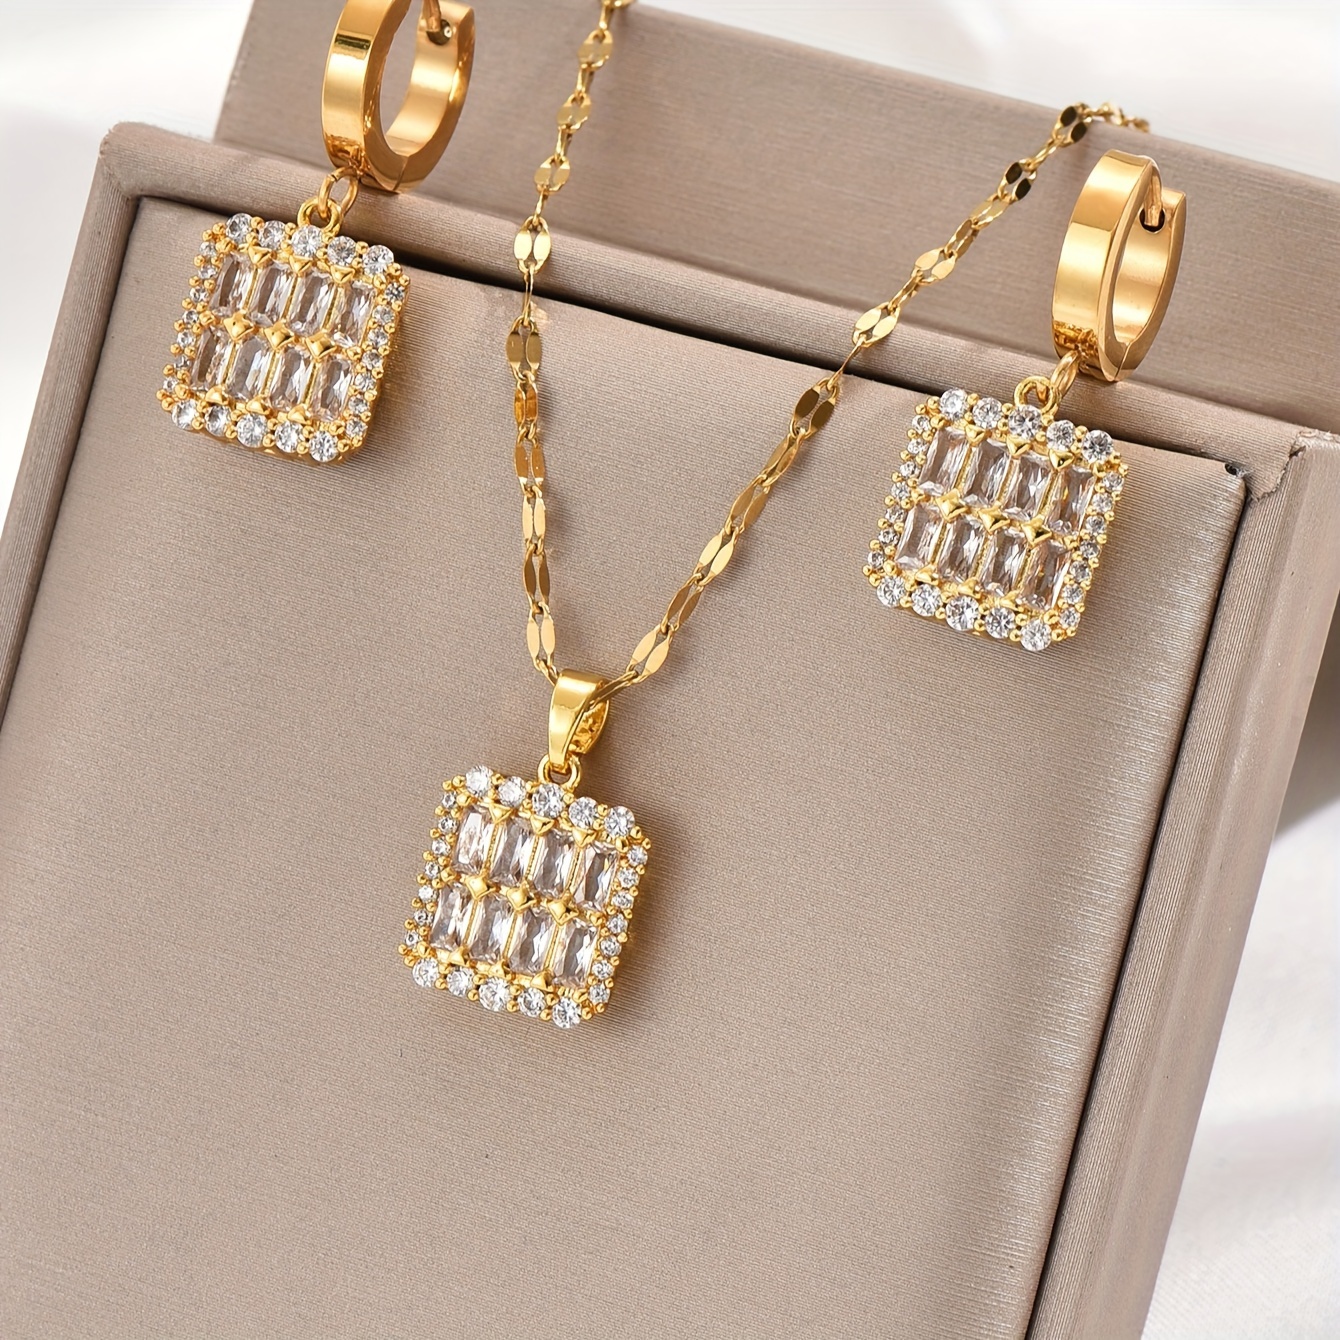 

Elegant & Retro Style, 3pcs Golden Copper Square Shape Design Pendant, Inlay Shiny Zircon Necklace, Studs Set, Fashion Delicate Accessory For Daily Wear & Party, Idea Gift For Ladies